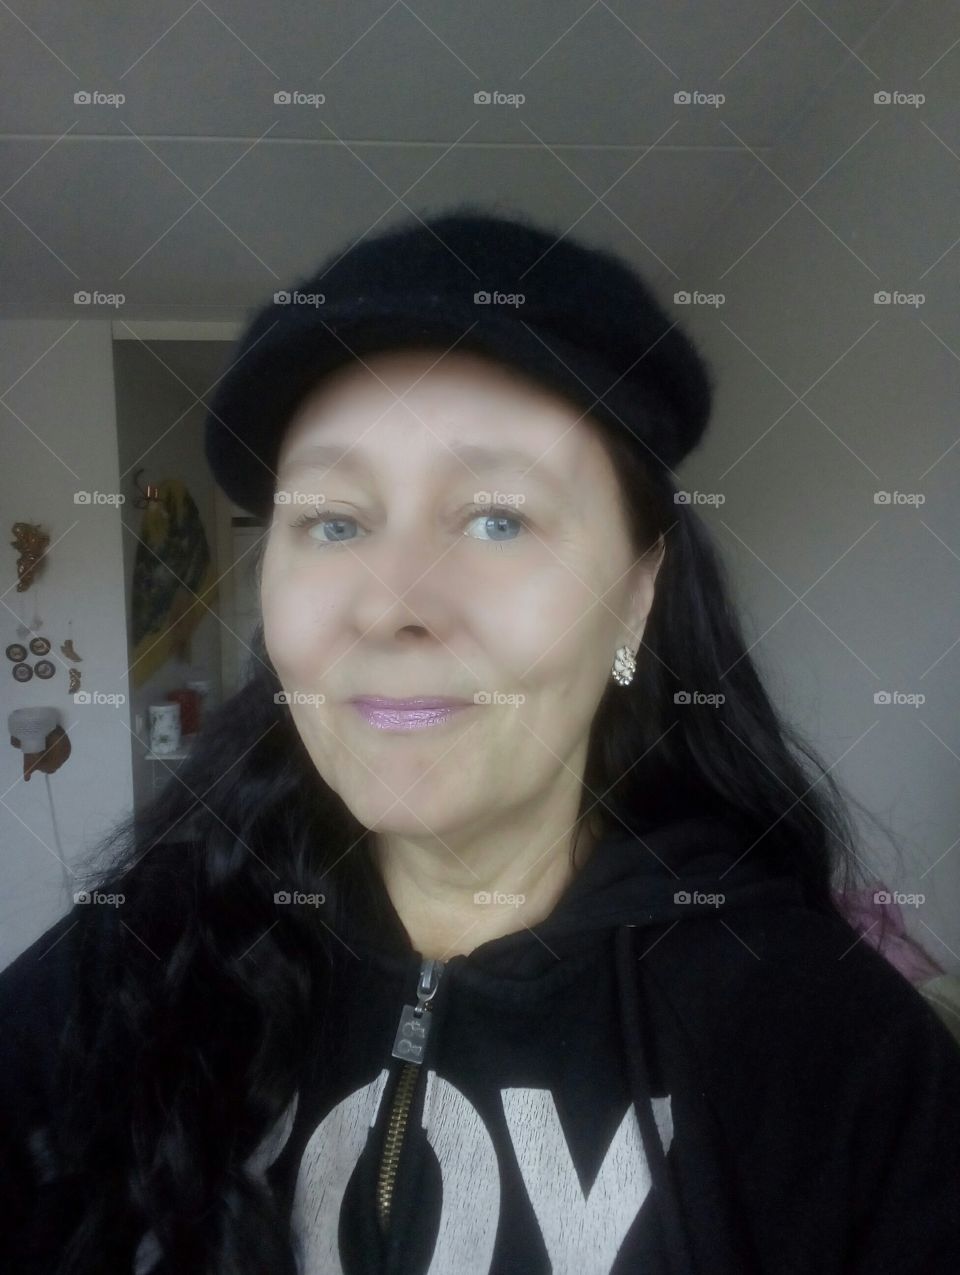 Me without makeup, going soon to the foodshop.